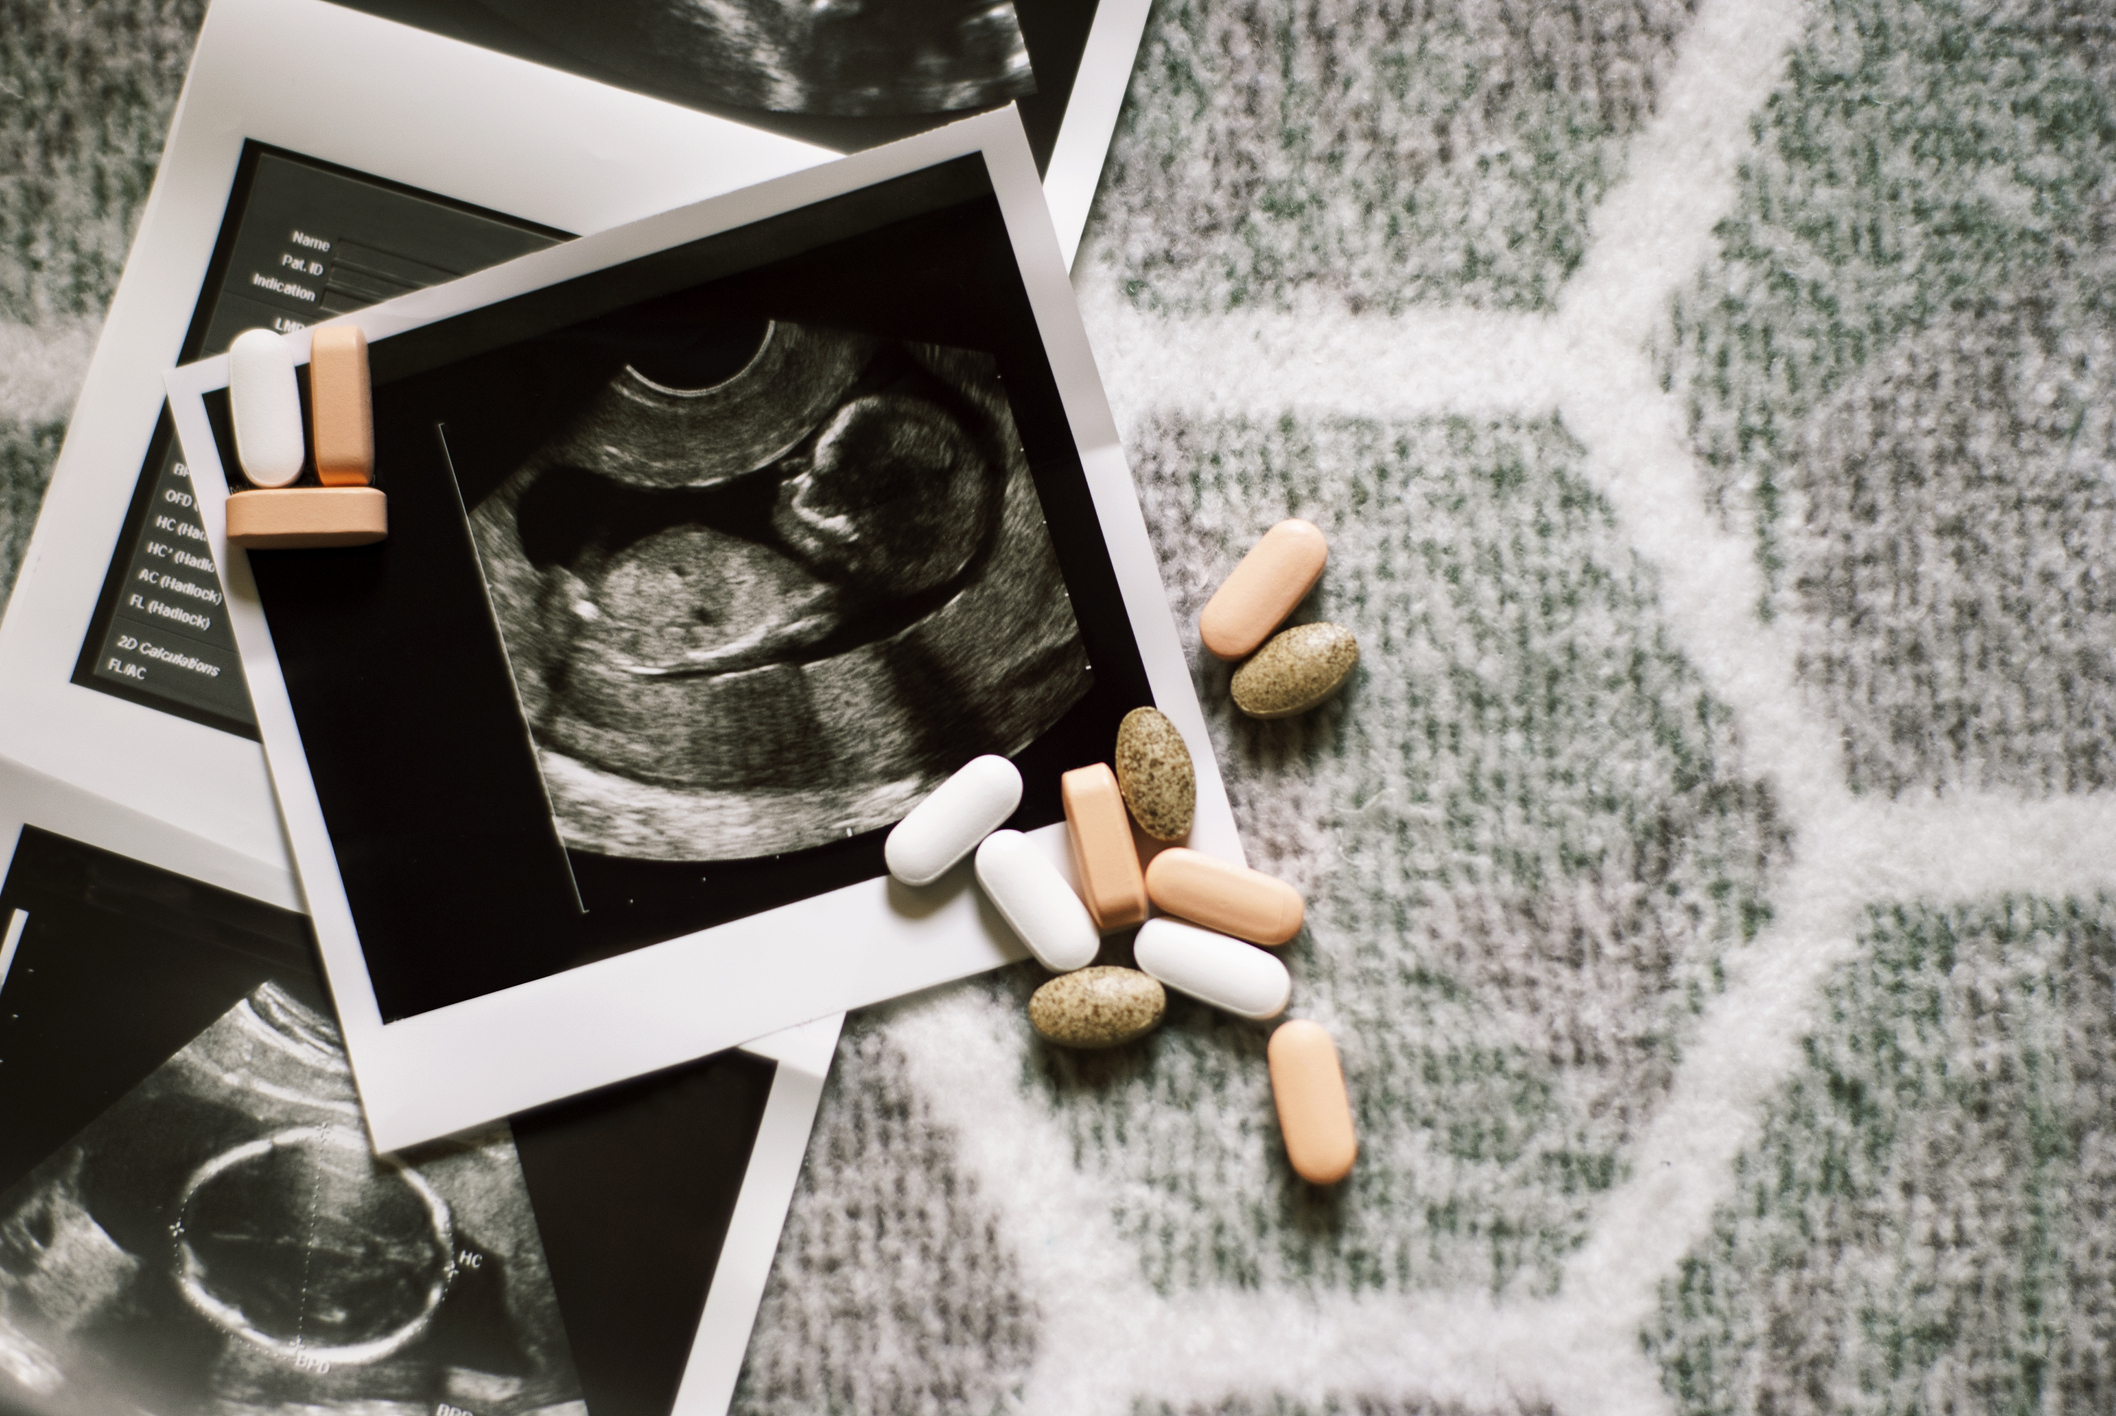 Some drugs taken during pregnancy can harm fetal development. Source: Getty Images